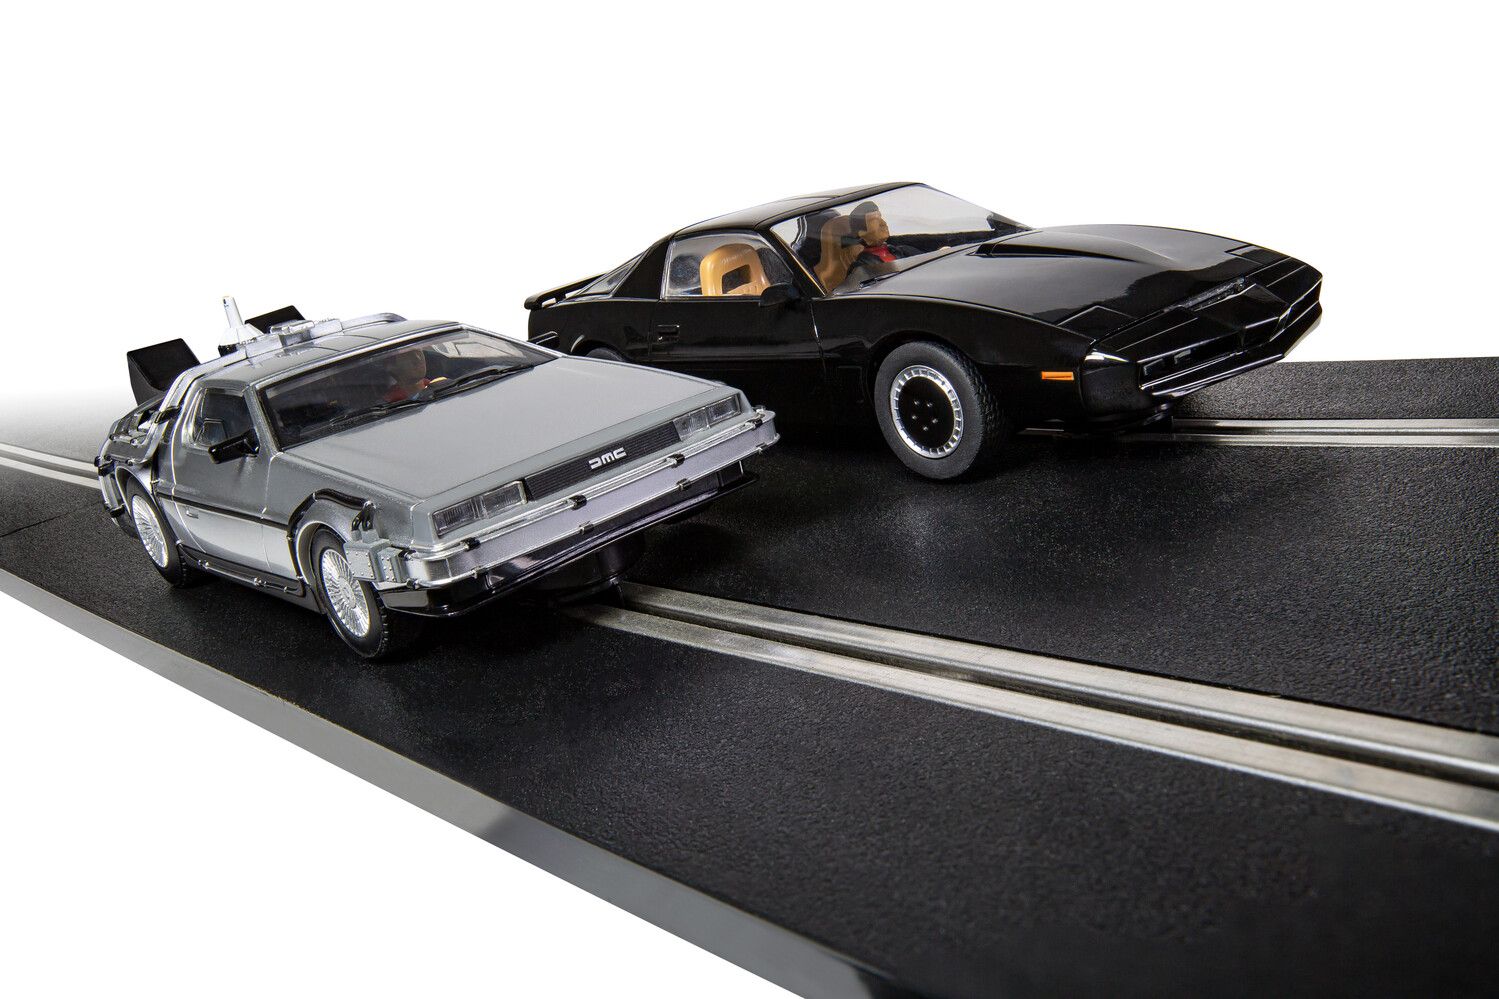 Hornby Hobbies C1431M Scalextric - Back to the Future vs Knight Rider Race Set - Refurbished Excellent